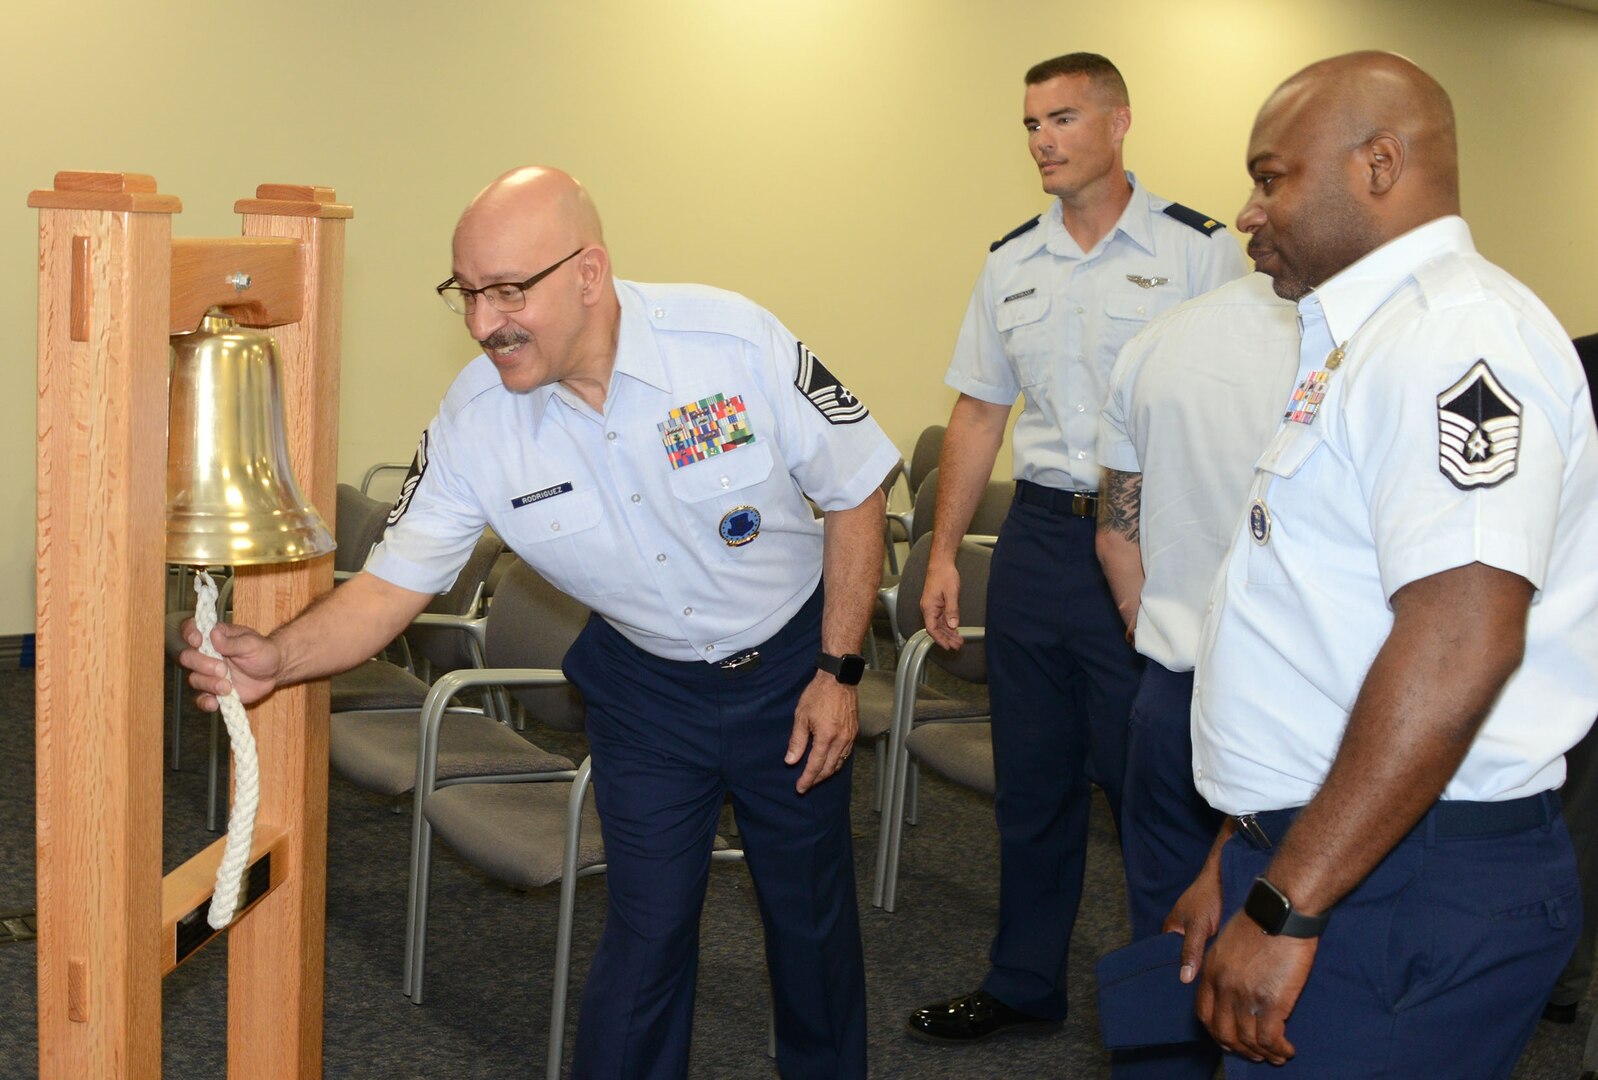 Senior Master Sgt. Randy Rodriguez, superintendent of the Air Force Recruiting Total Force Recruiting Cell at Joint Base San Antonio-Randolph, rings the bell signifying Air Force Recruiting Service reached their yearly goal. Each person at AFRS headquarters gets a turn ringing the bell celebrating making goal.